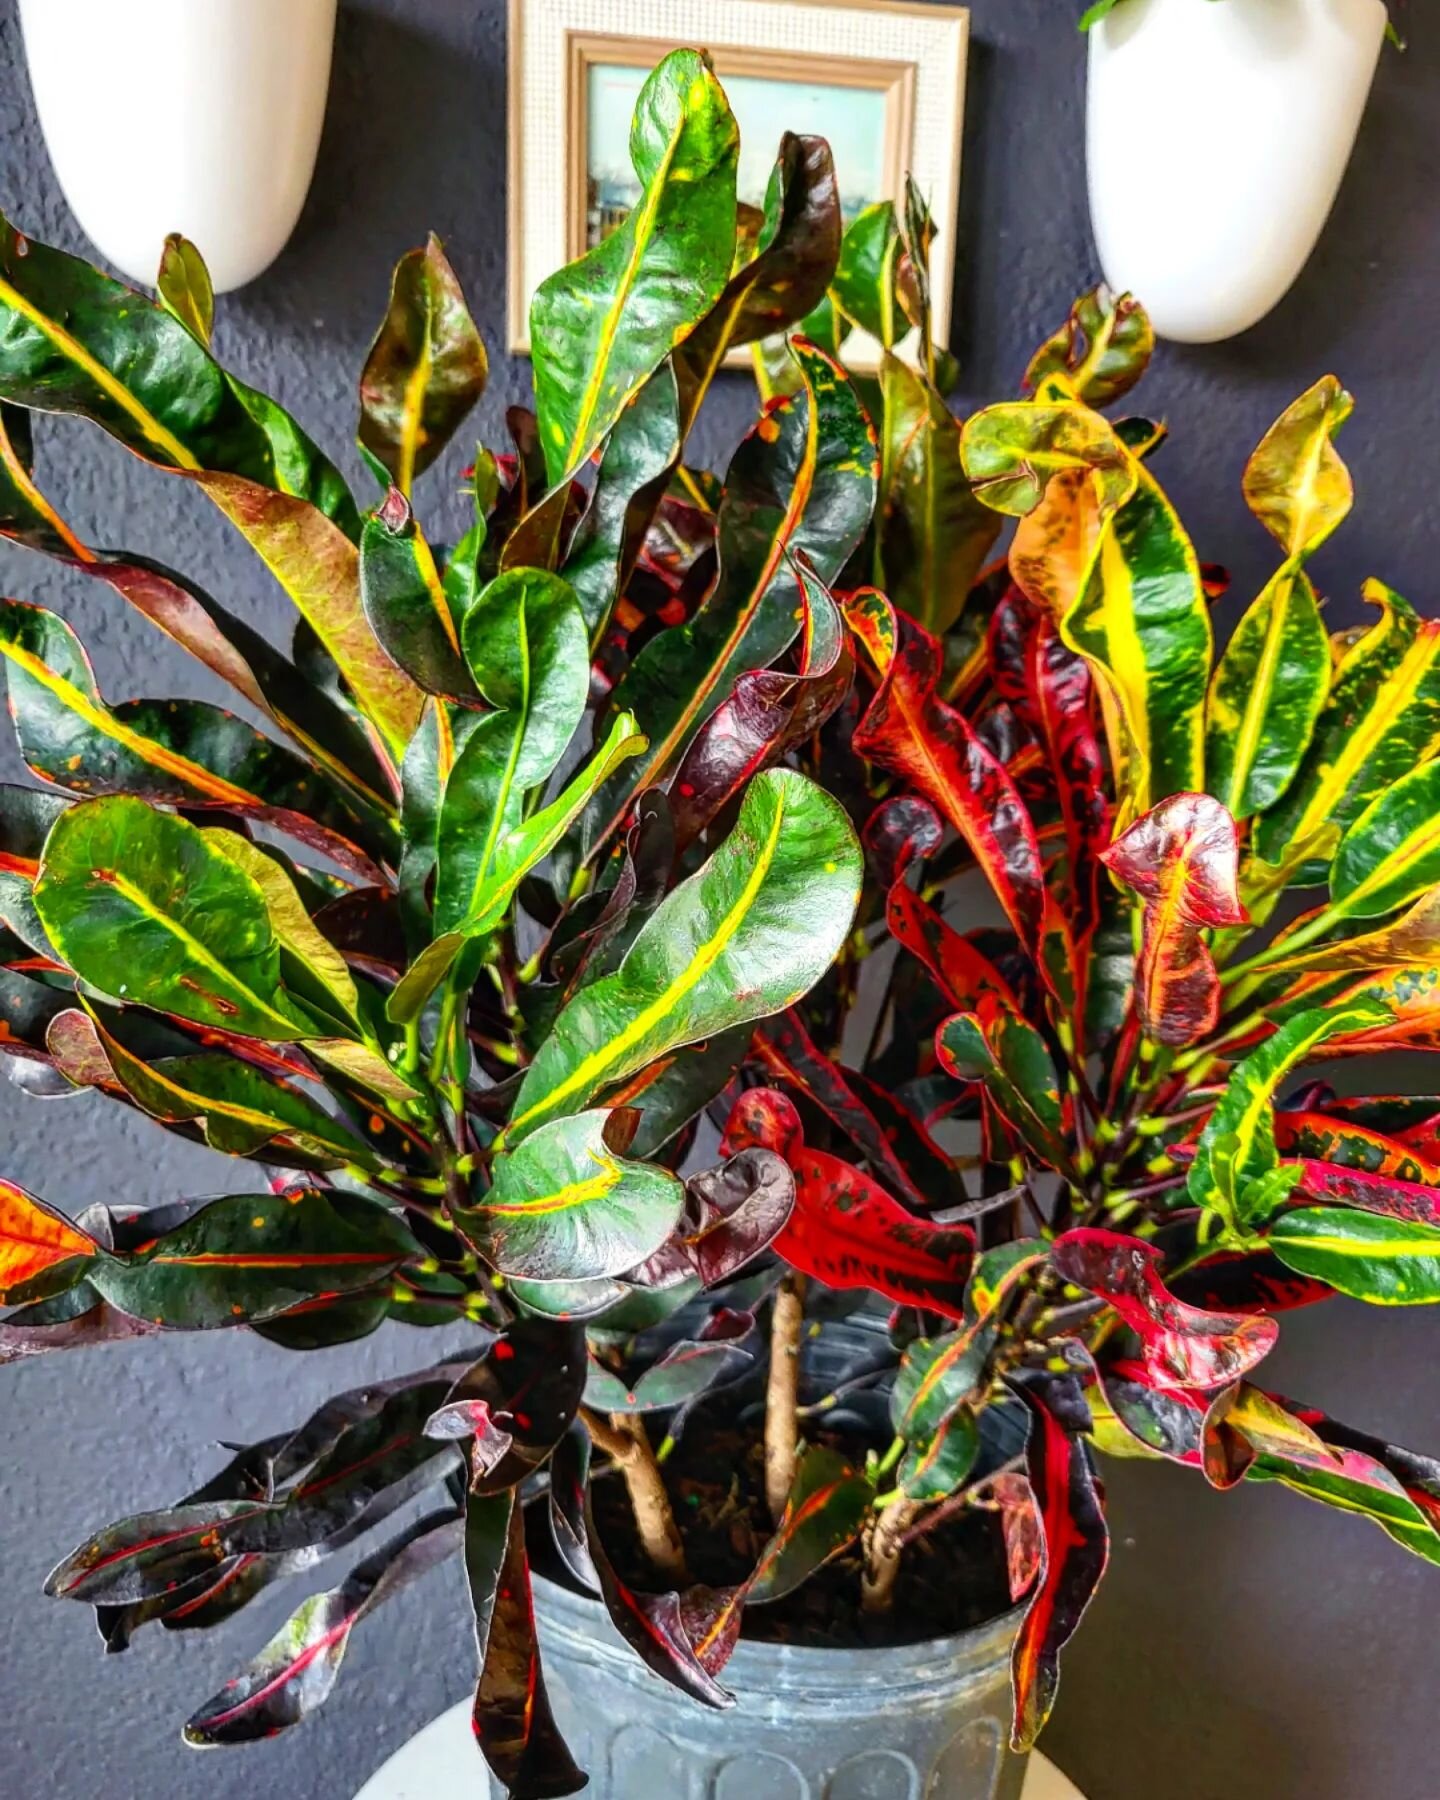 ✨️ CODIAEUM VARIEGATUM (Garden Croton) ✨️

📍Native to Indonesia
🌡 Lives in temperatures of 65-95&deg;
💦 Do not let the soil dry out! Check soil with moisture meter, and keep soil moist. Goes from croton to crouton real quickly! Can be top or botto